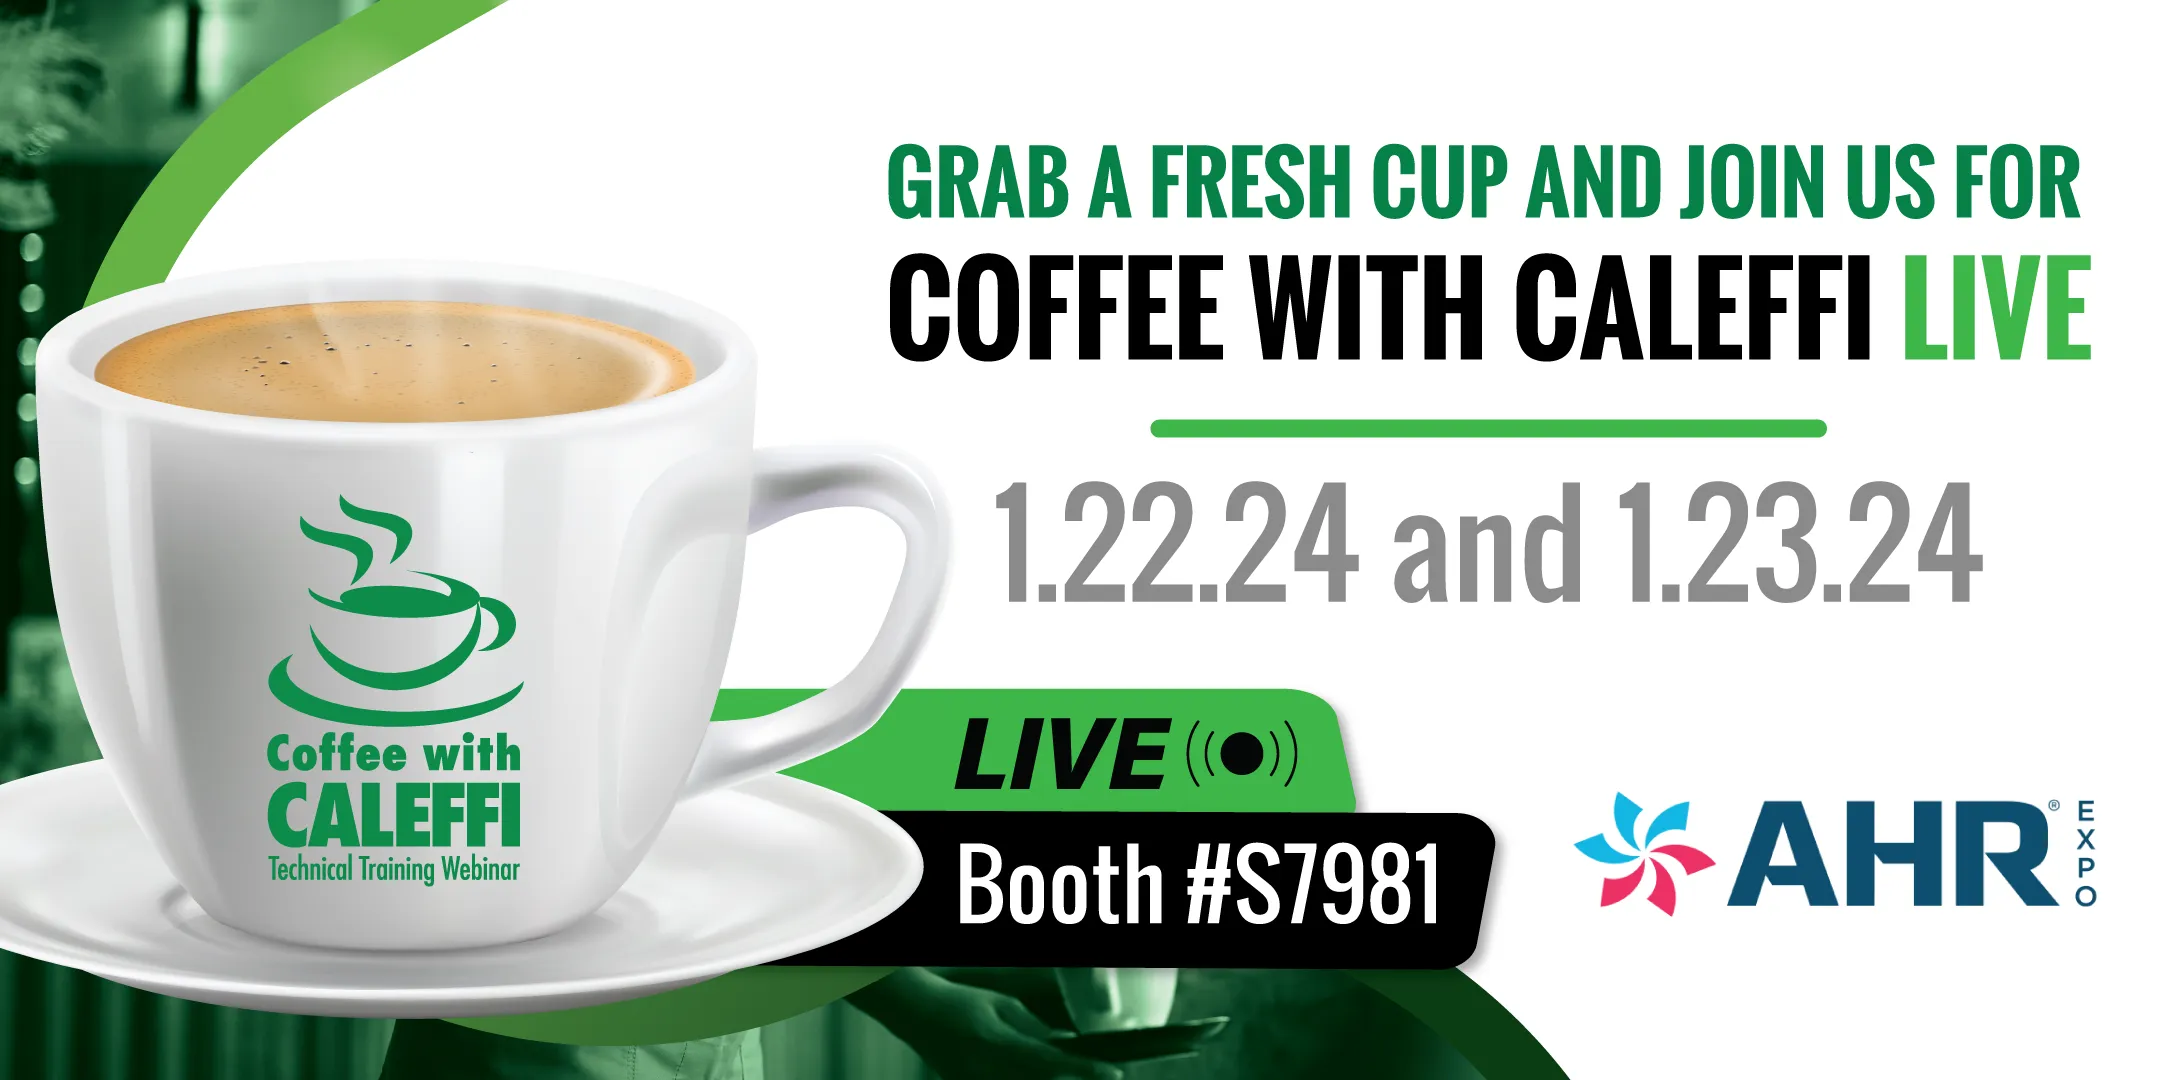 MEDIA RELEASE:  Announcing Coffee with Caleffi LIVE at AHR